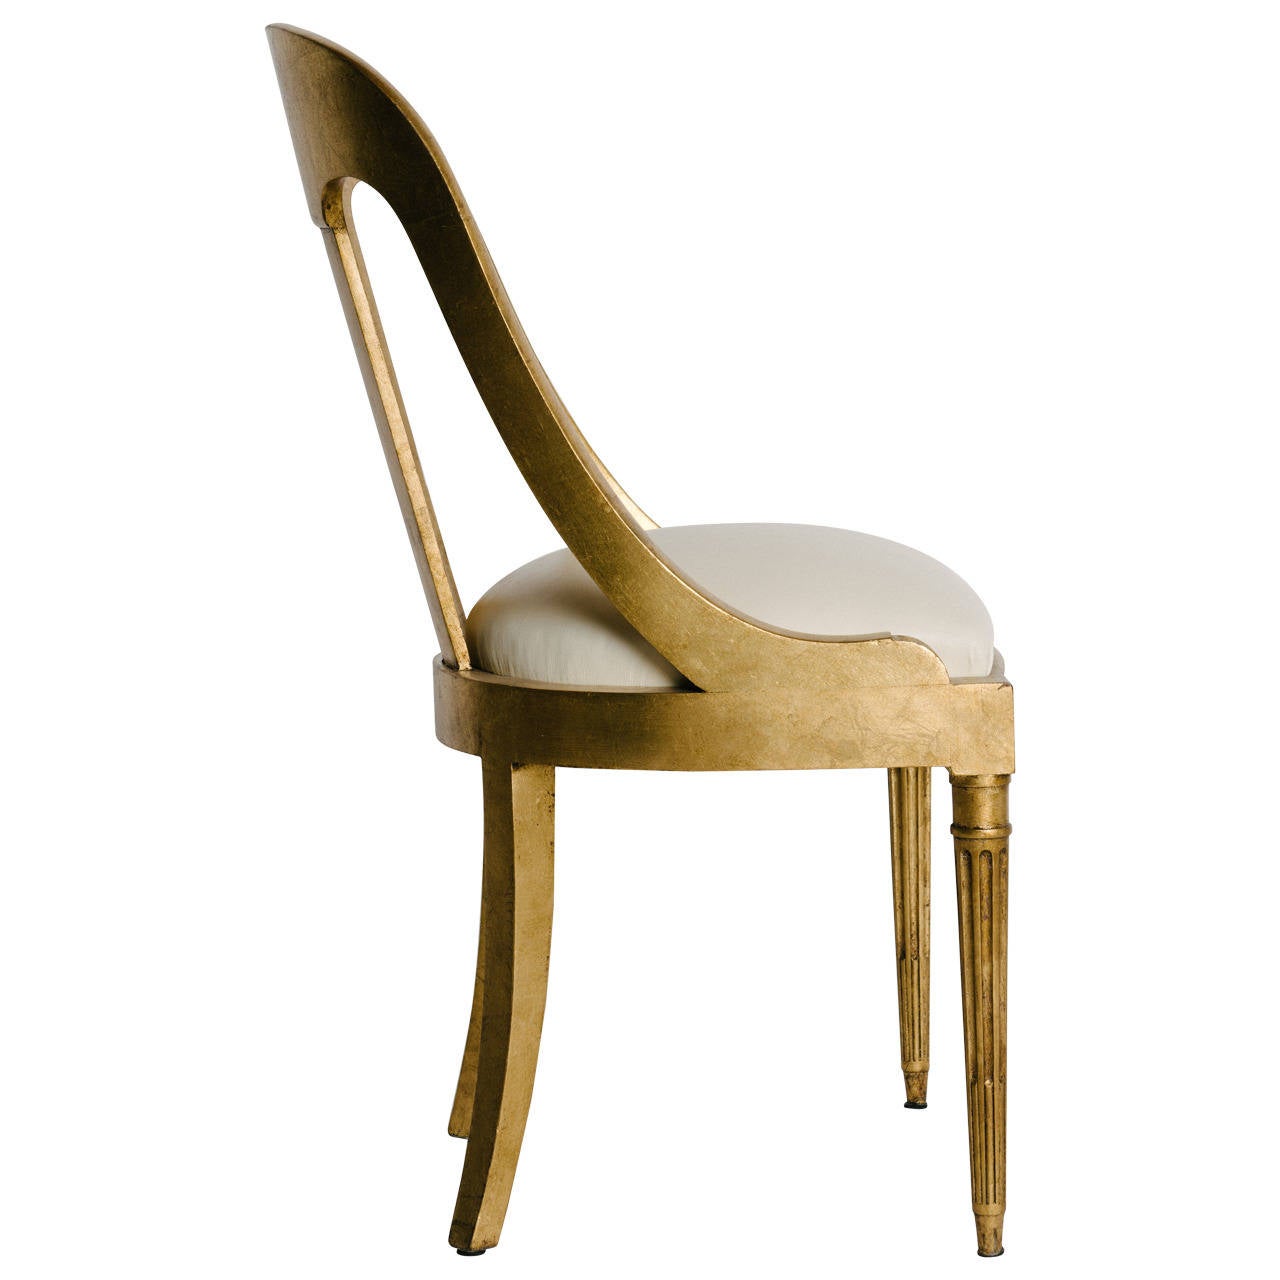 Period Charles X gilded chair newly upholstered with ecru leather.